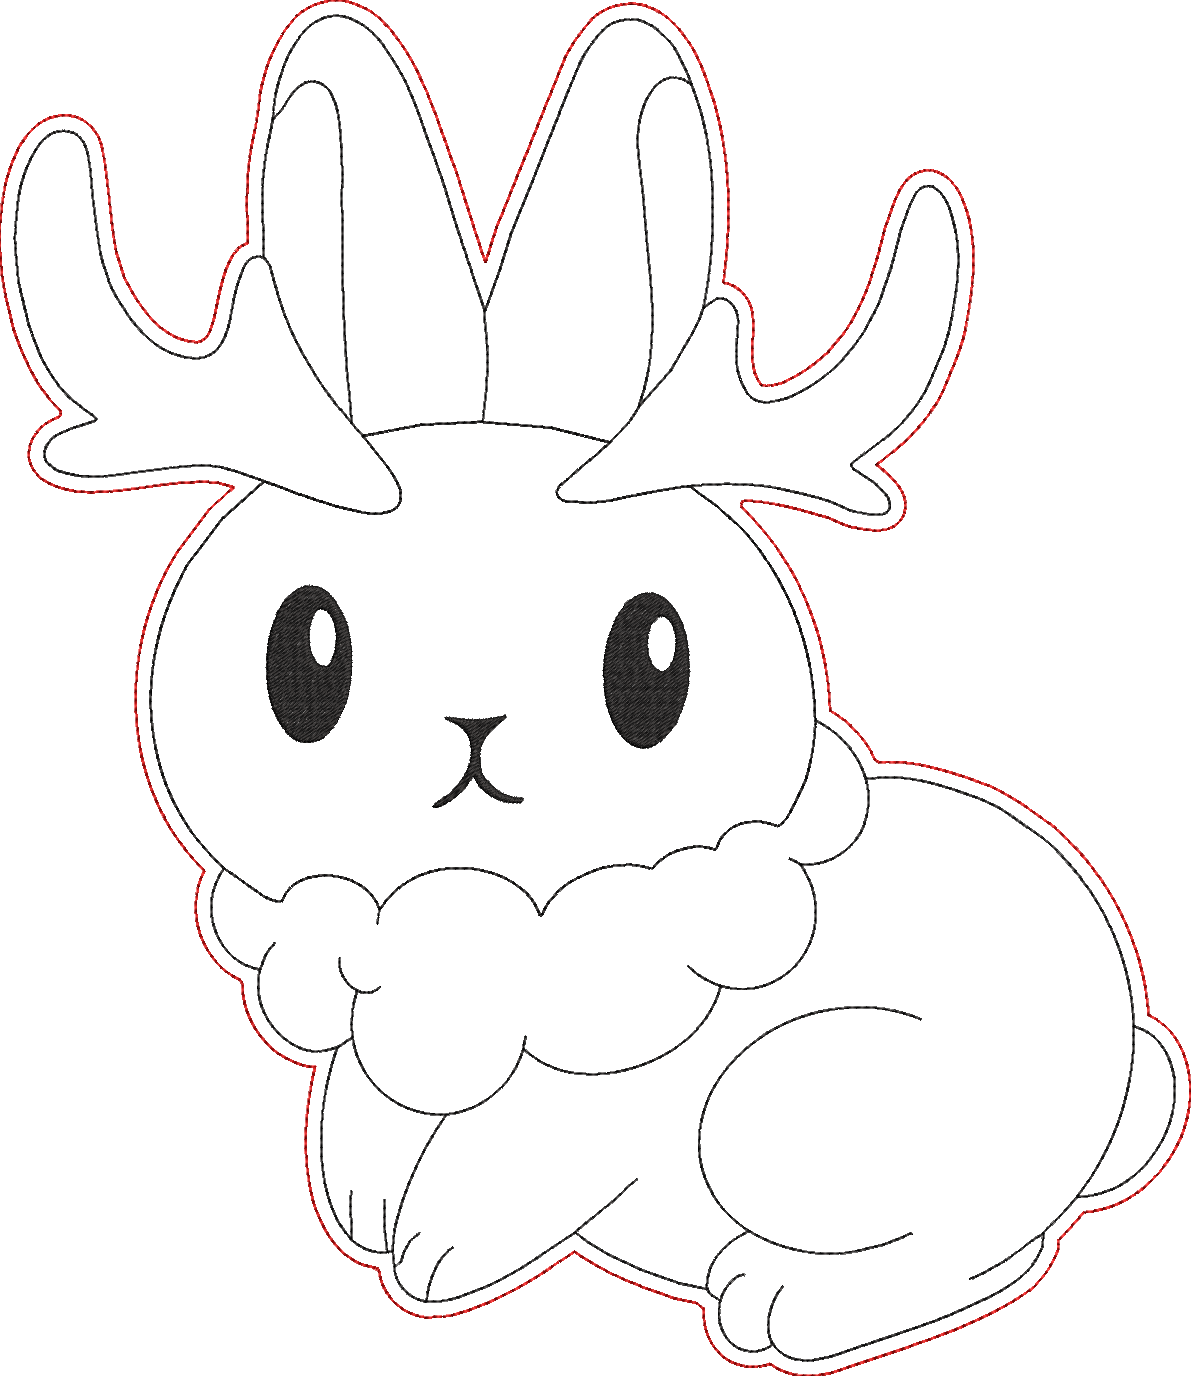 Cute Cryptid Coloring Dolls - Jackalope Embroidery Design